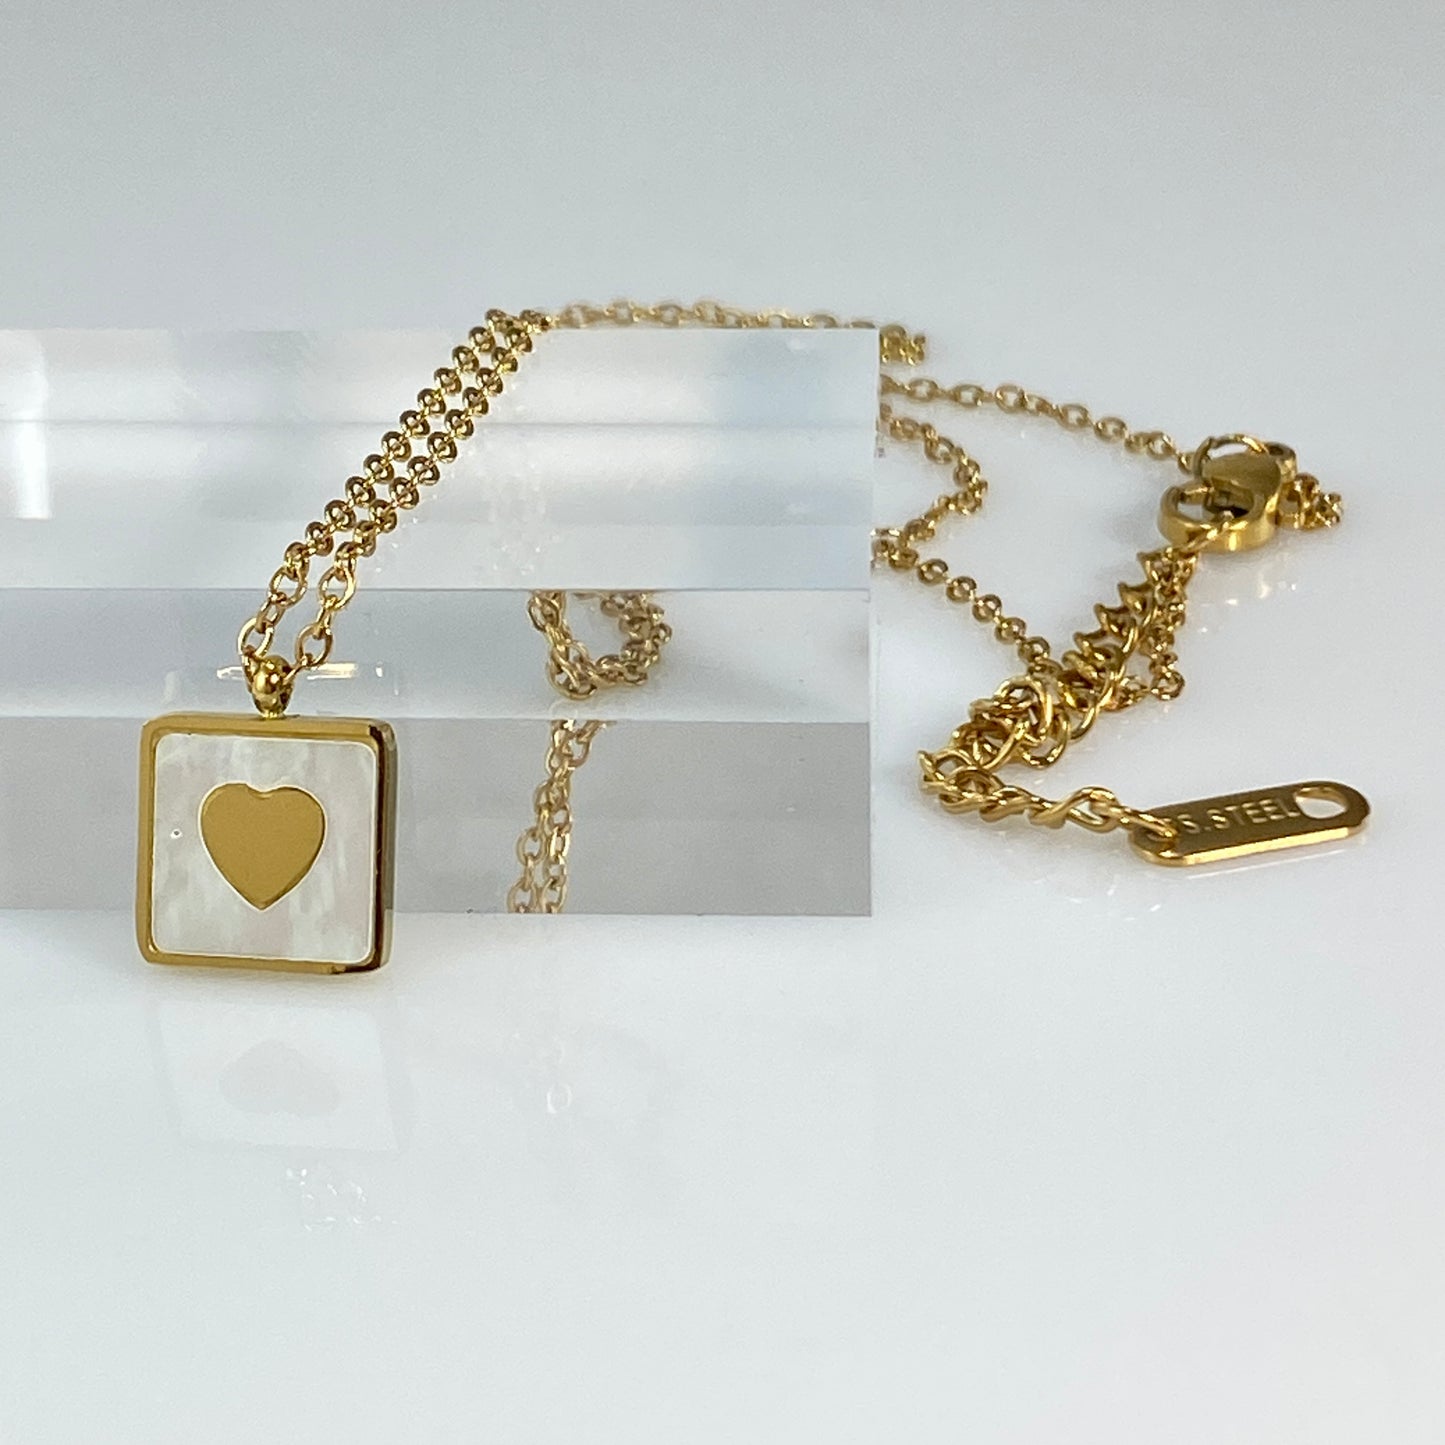 18 kt Gold Plated Heart in Mother of Pearl Pendant on Stainless Steel Cable Chain Link Necklace